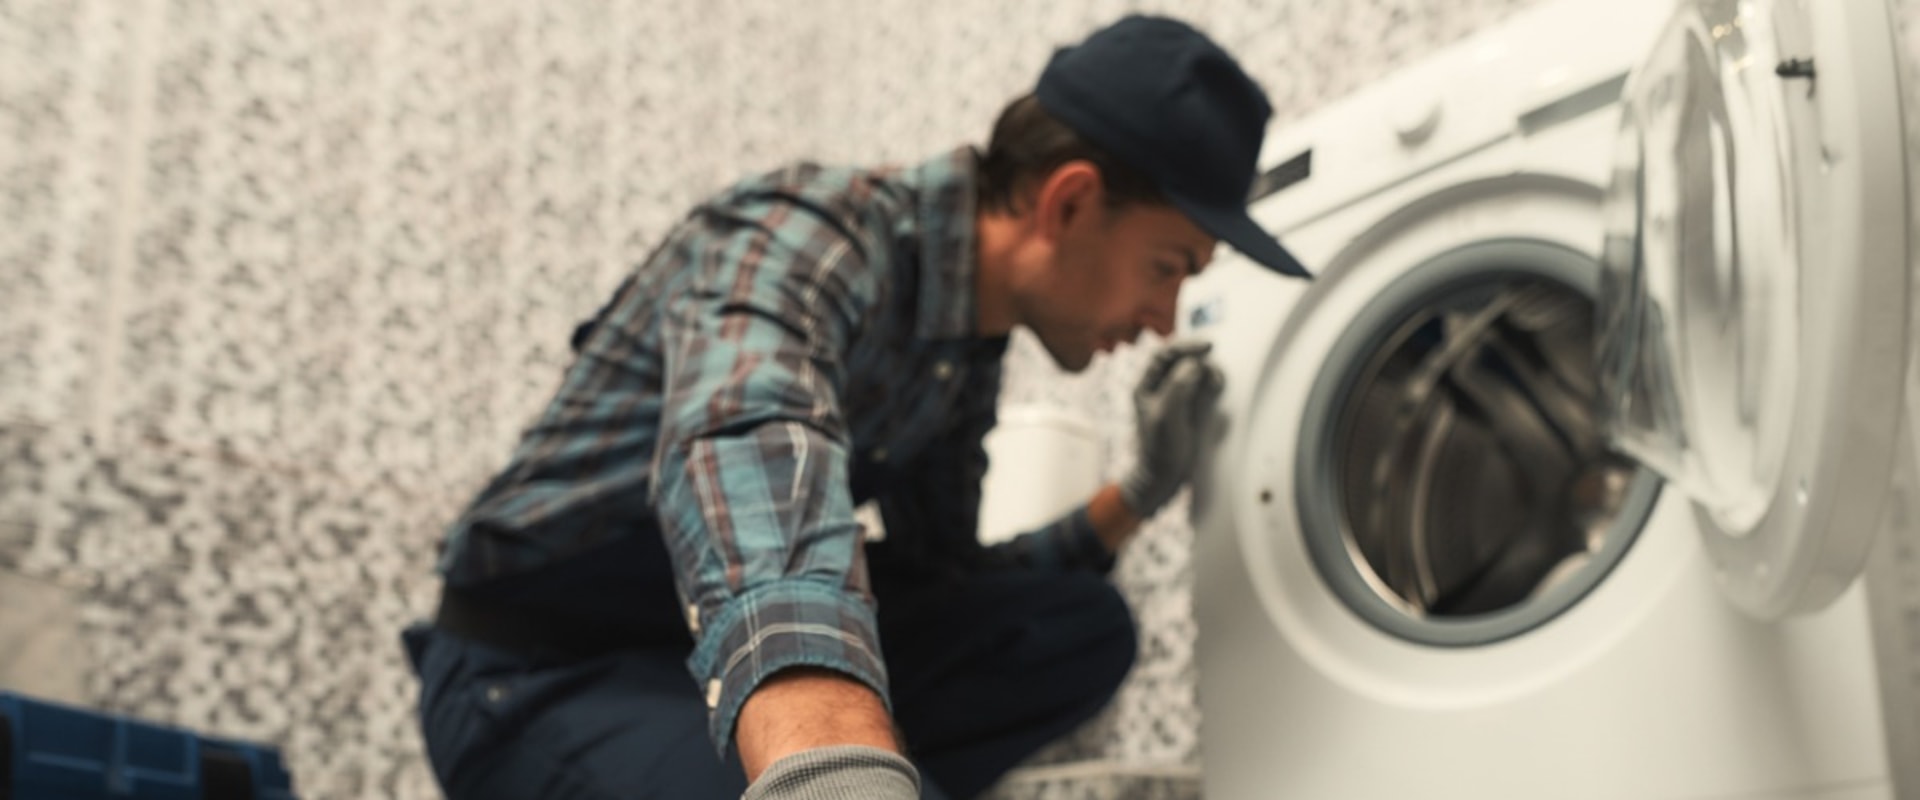 Making It Easy To Fix Your Appliances: Where To Find Trustworthy Washer And Dryer Repair Services In Greenacres